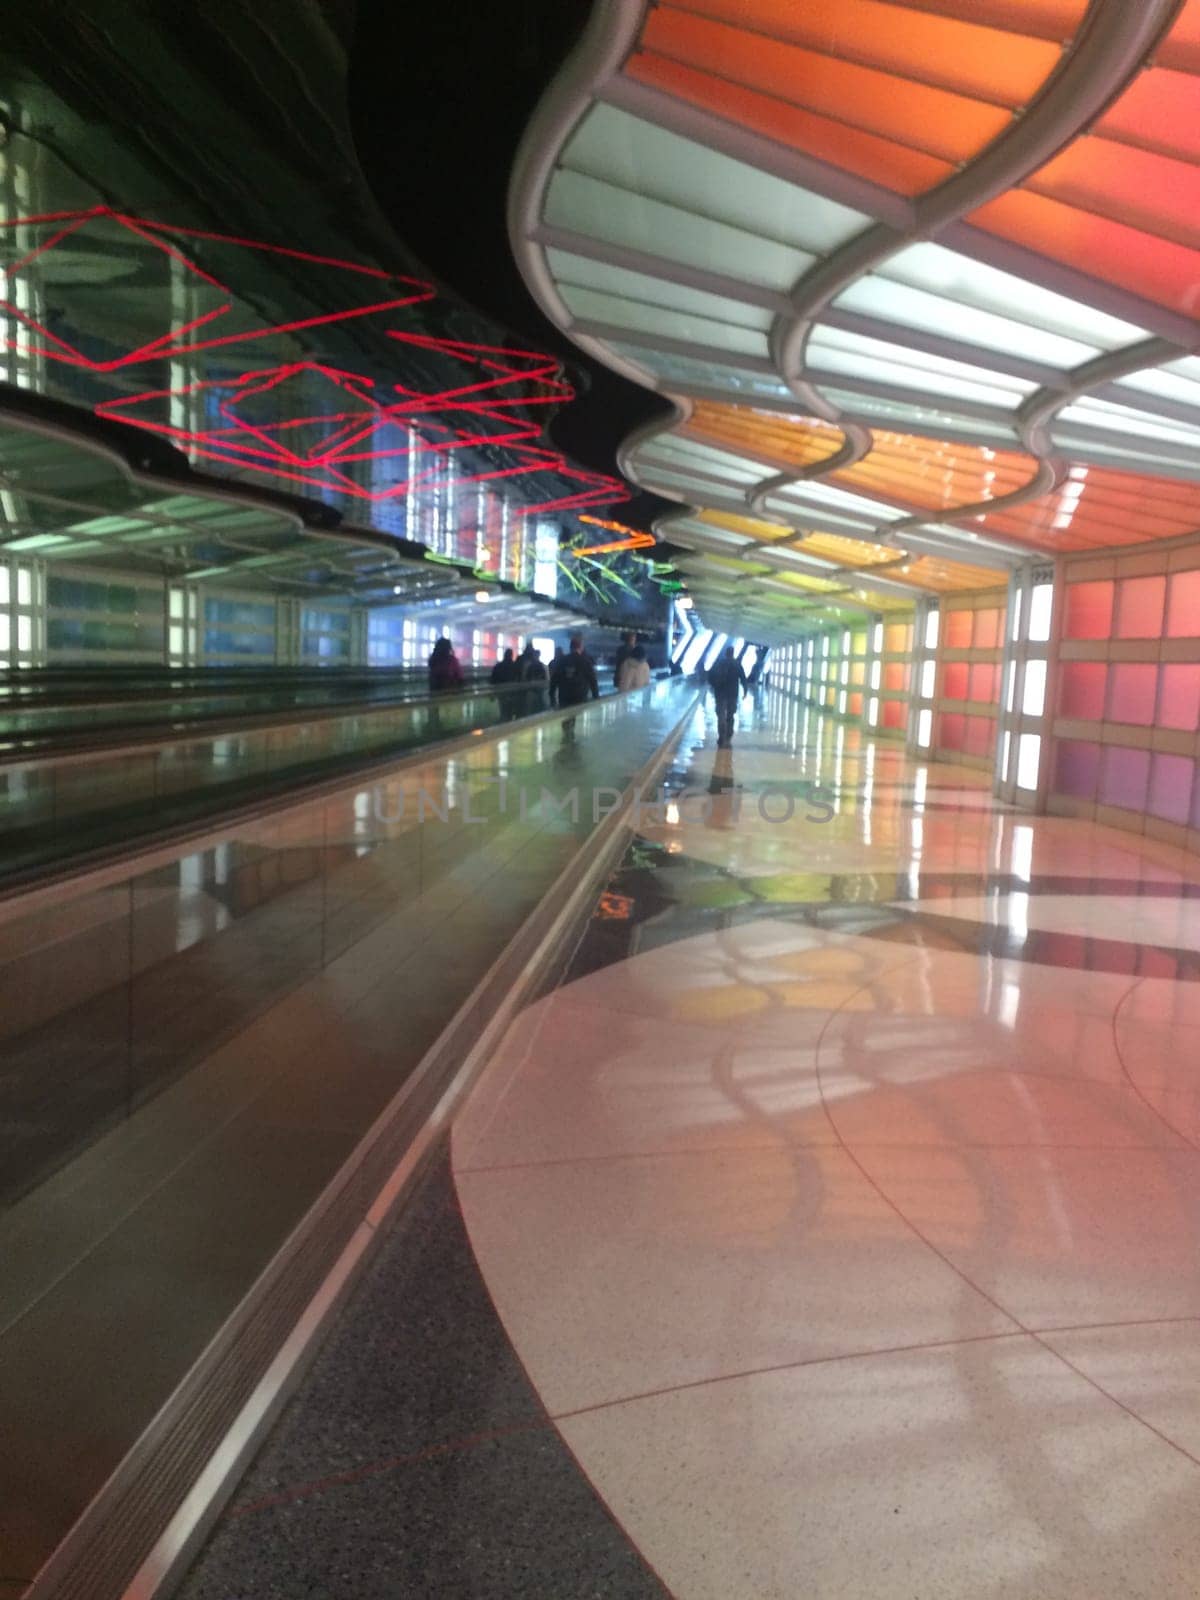 Chicago O'Hare International Airport Modern Colorful Lighting by grumblytumbleweed